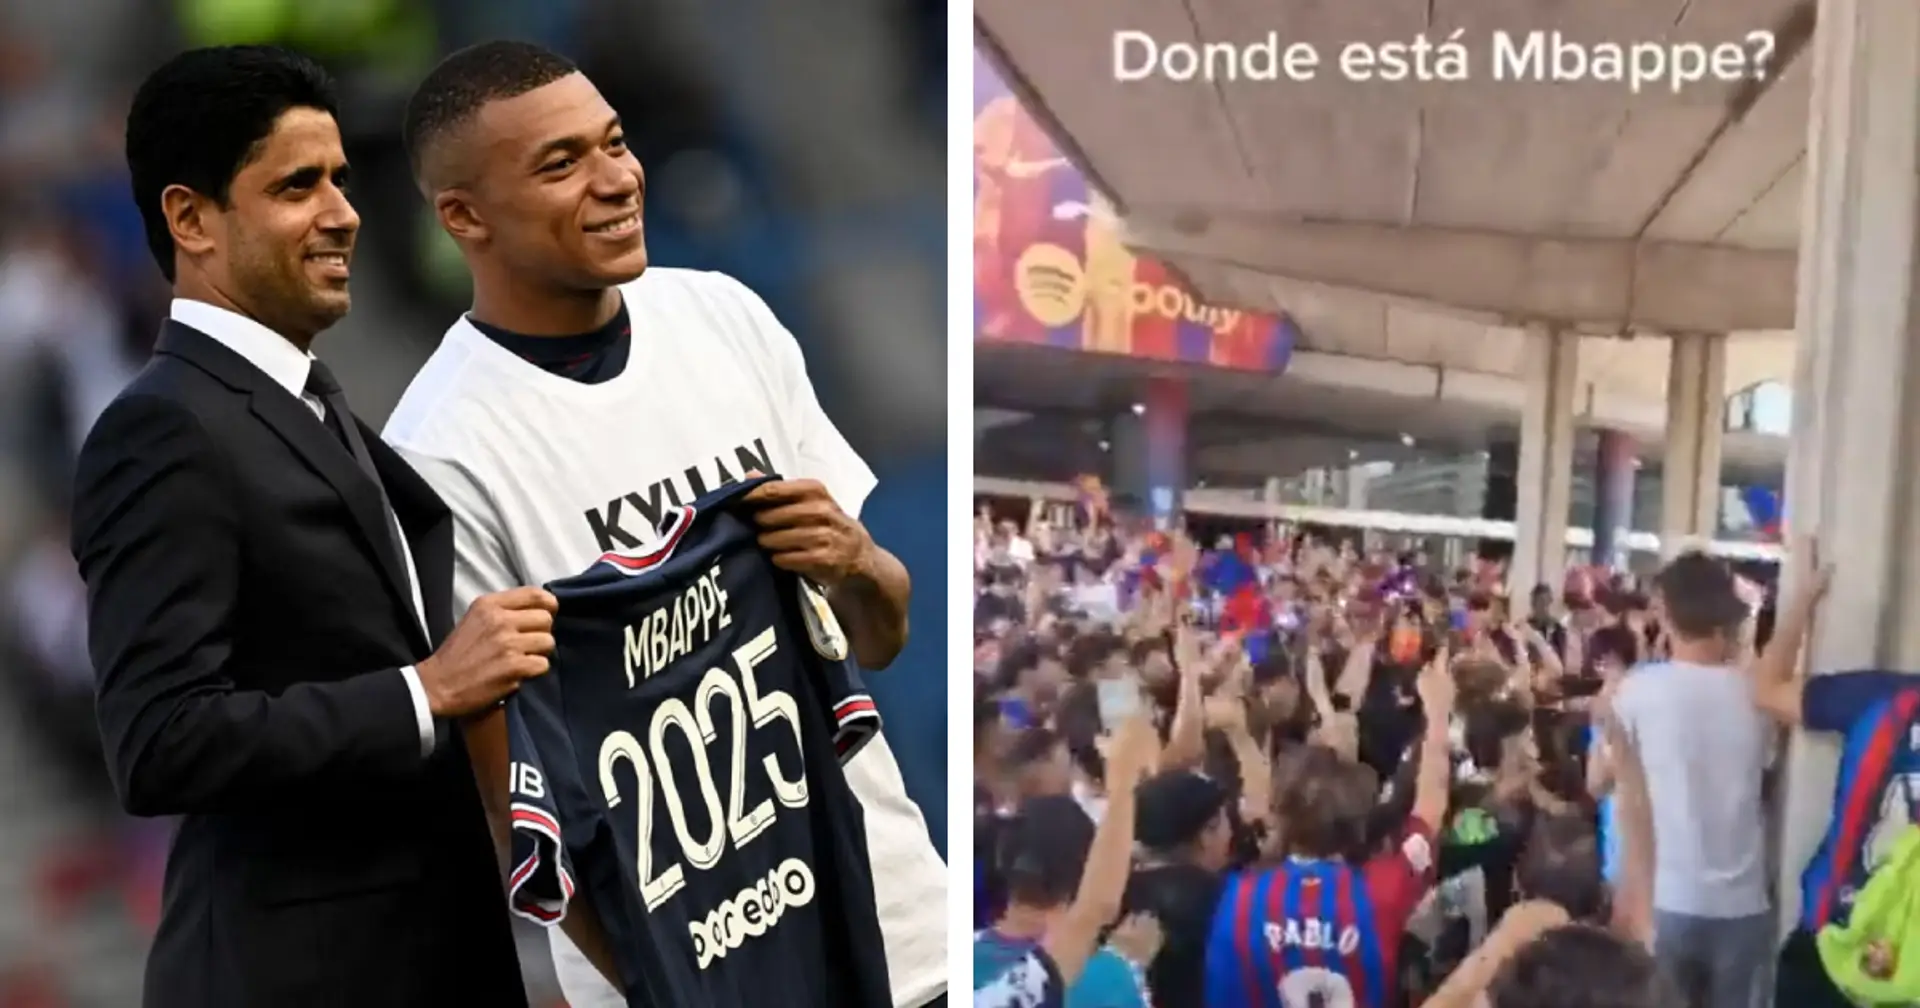 'Where's Mbappe?': Barcelona fans troll Real Madrid with massive chant outside Camp Nou